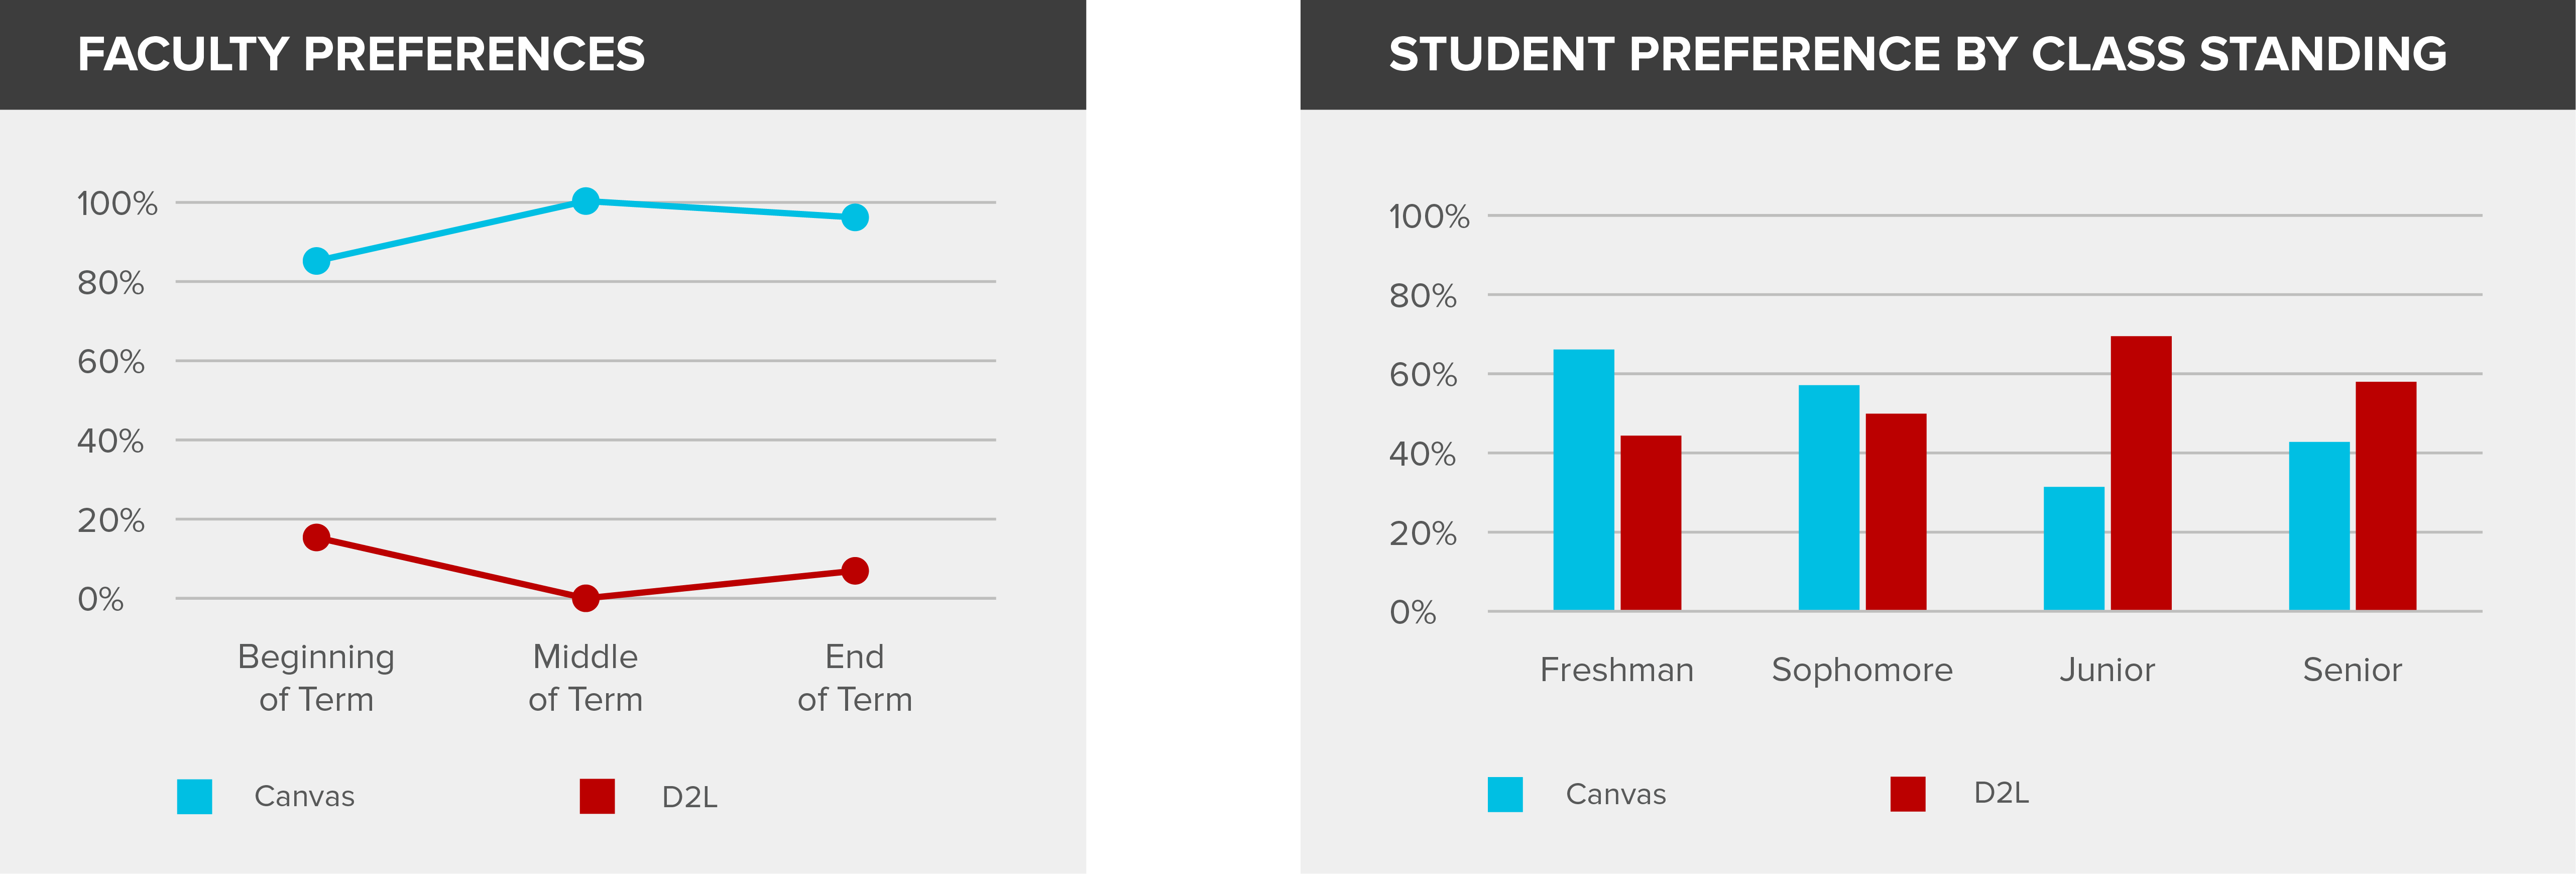 Graphs showing increased preference for Canvas over D2L by faculty and students